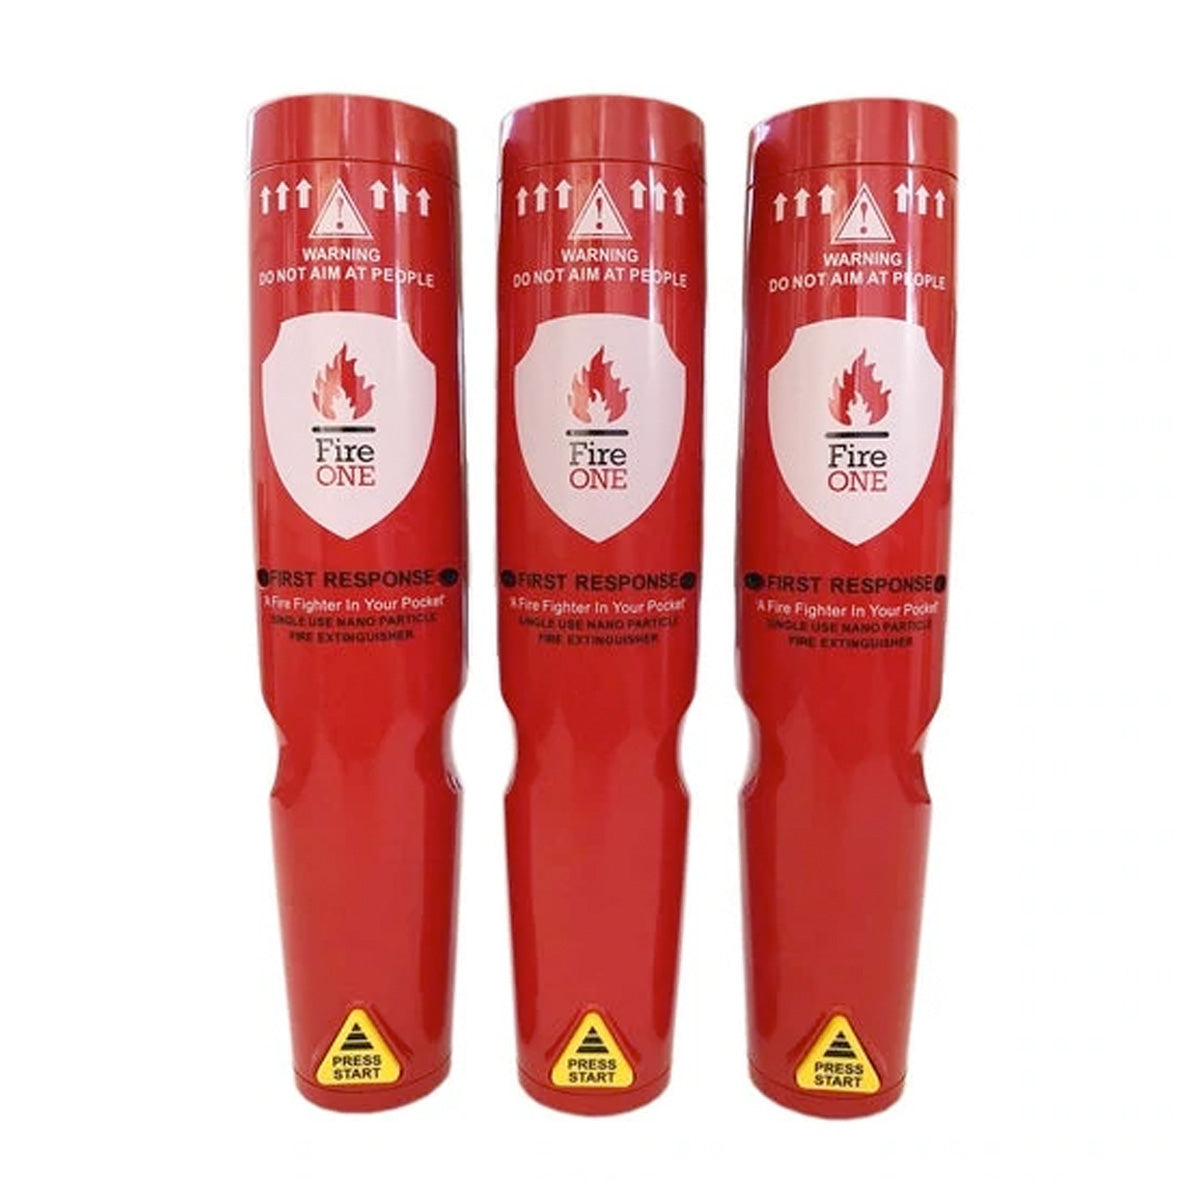 Fire One First Response Portable Fire Extinguisher Tactical Gear Fire One One Unit Tactical Gear Supplier Tactical Distributors Australia